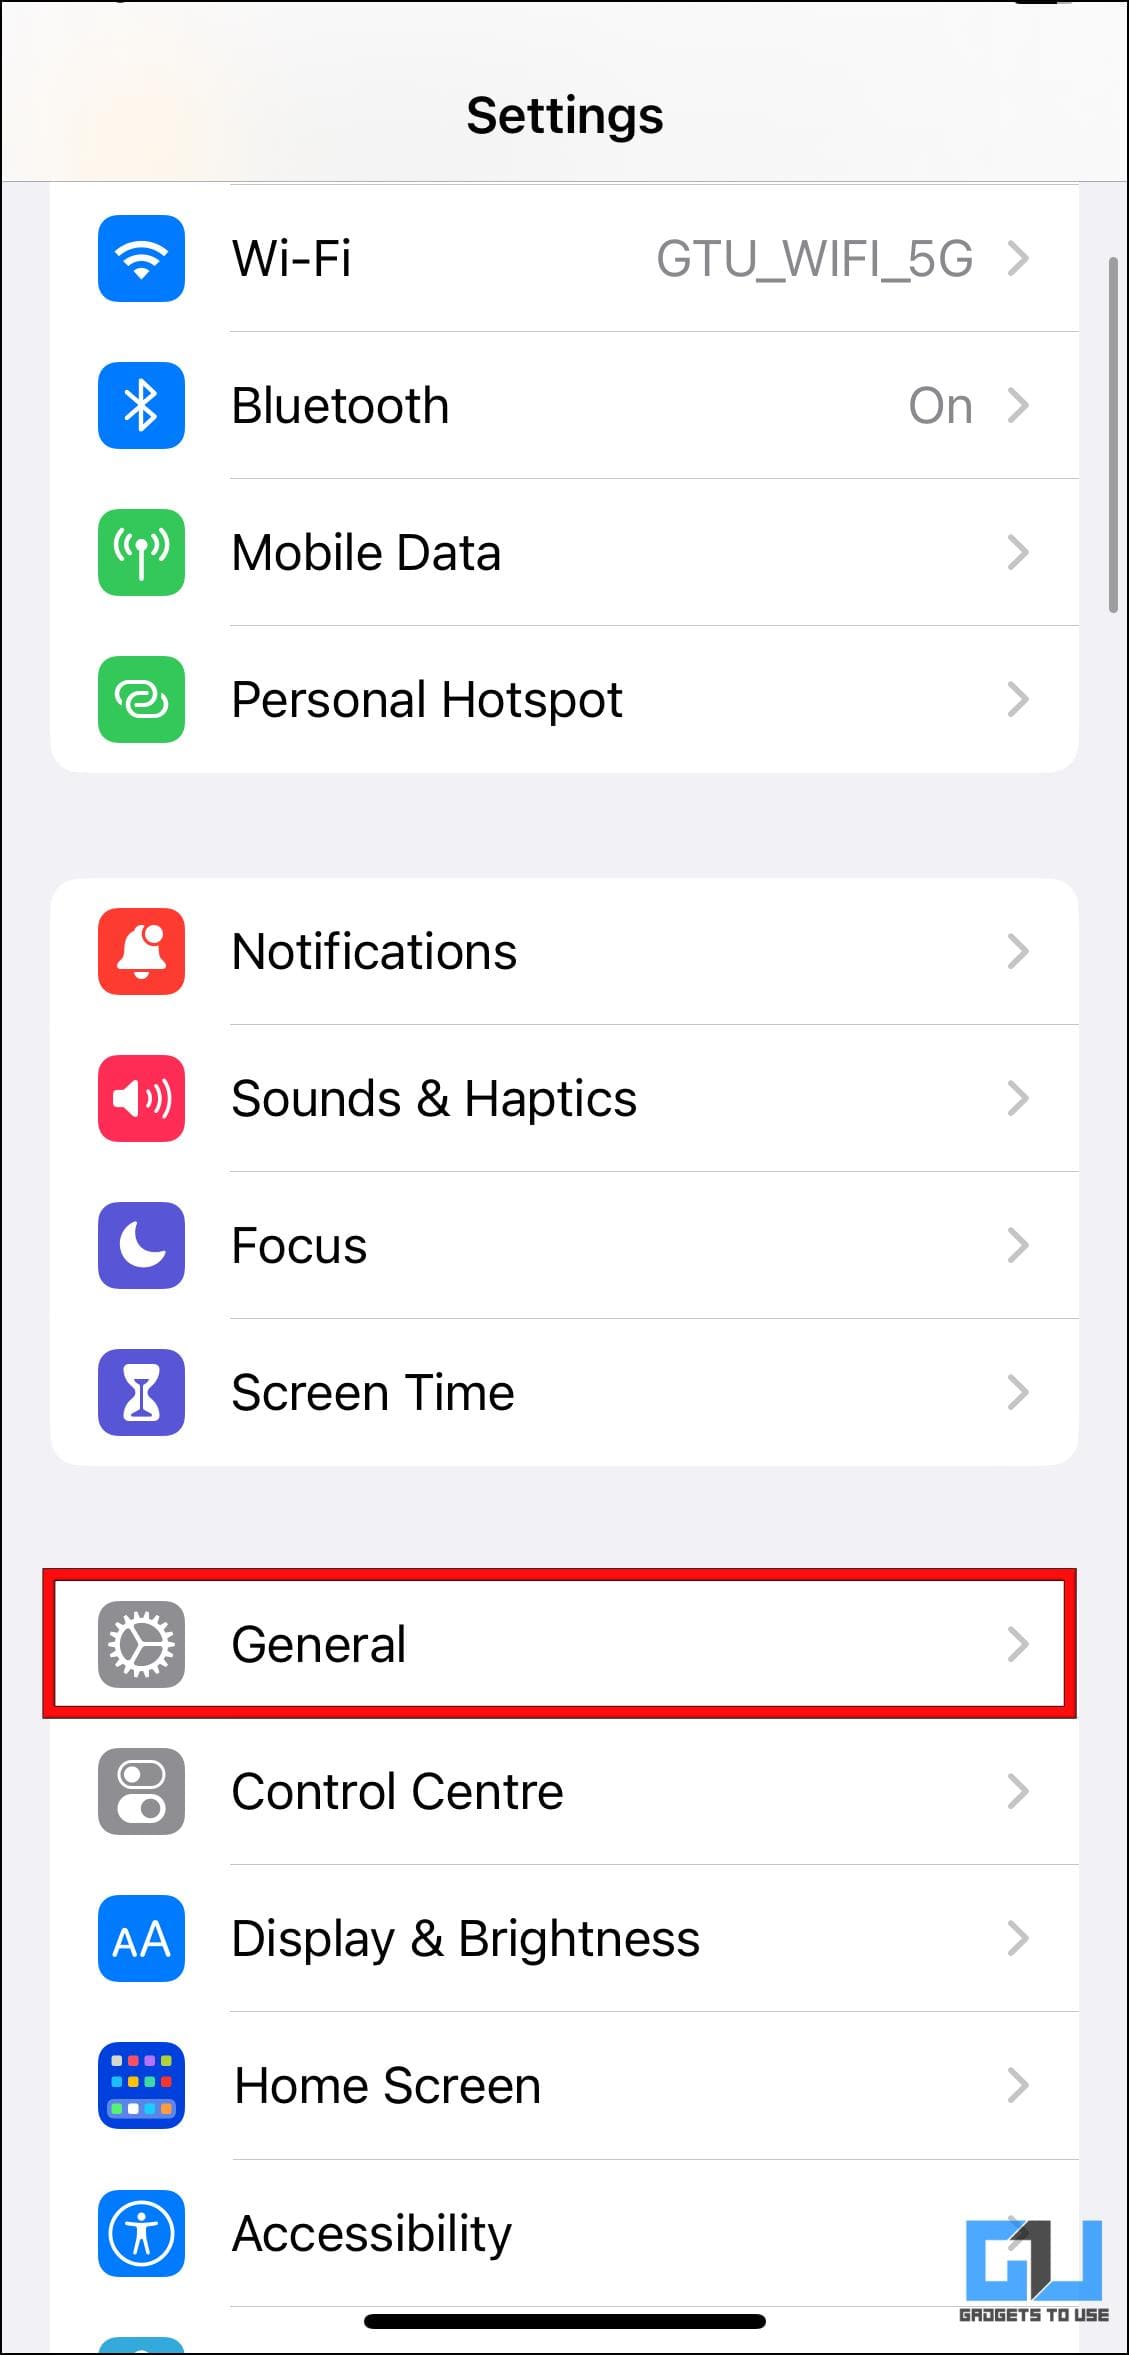 Disable Double Space Period on iPhone